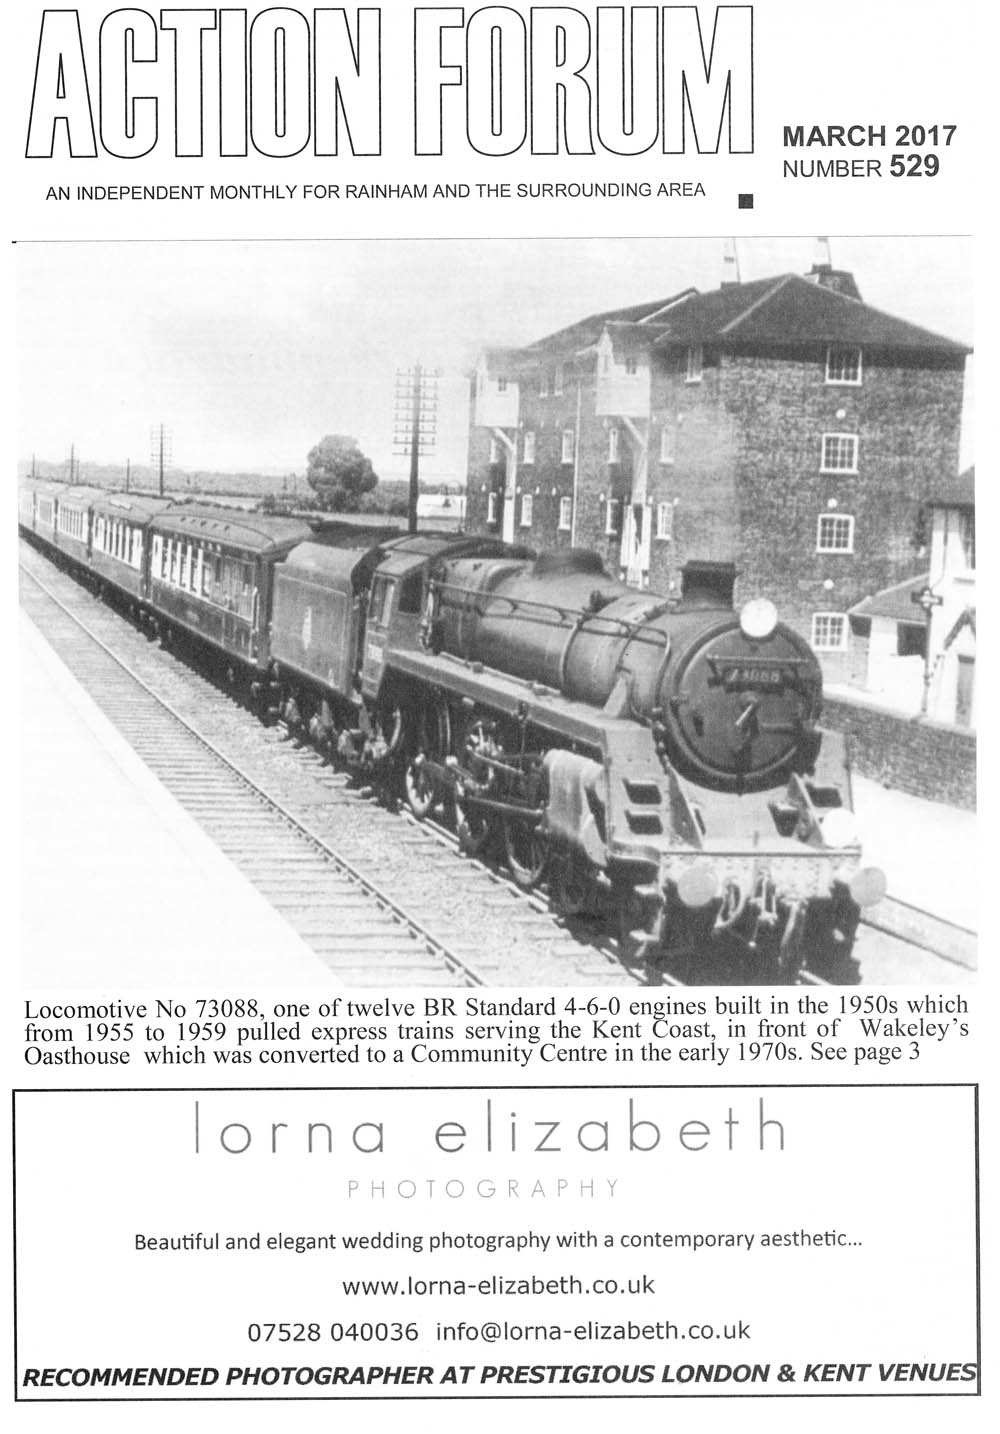 Cover photo of Loco No. 73088 pulling express trains serving Kent coast.